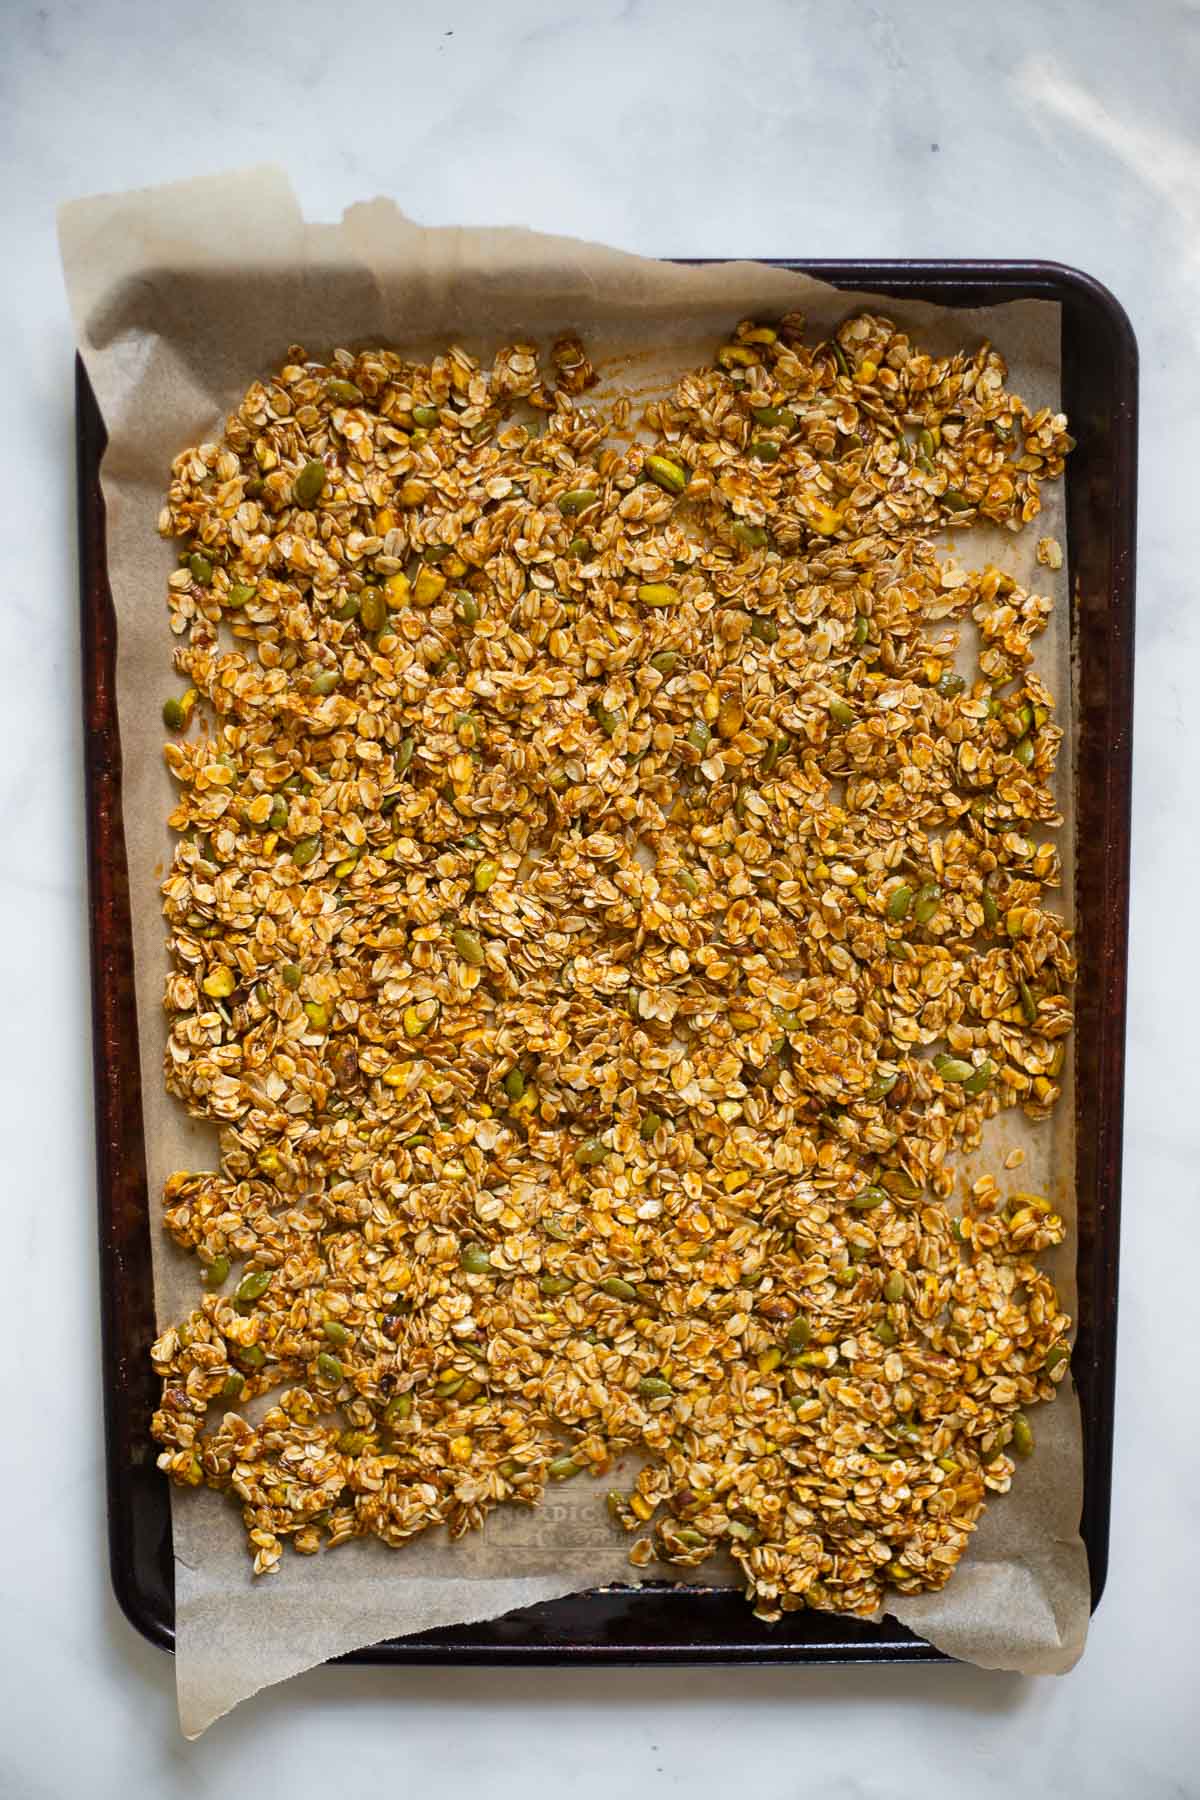 spread granola onto baking sheet lined with parchment paper. 